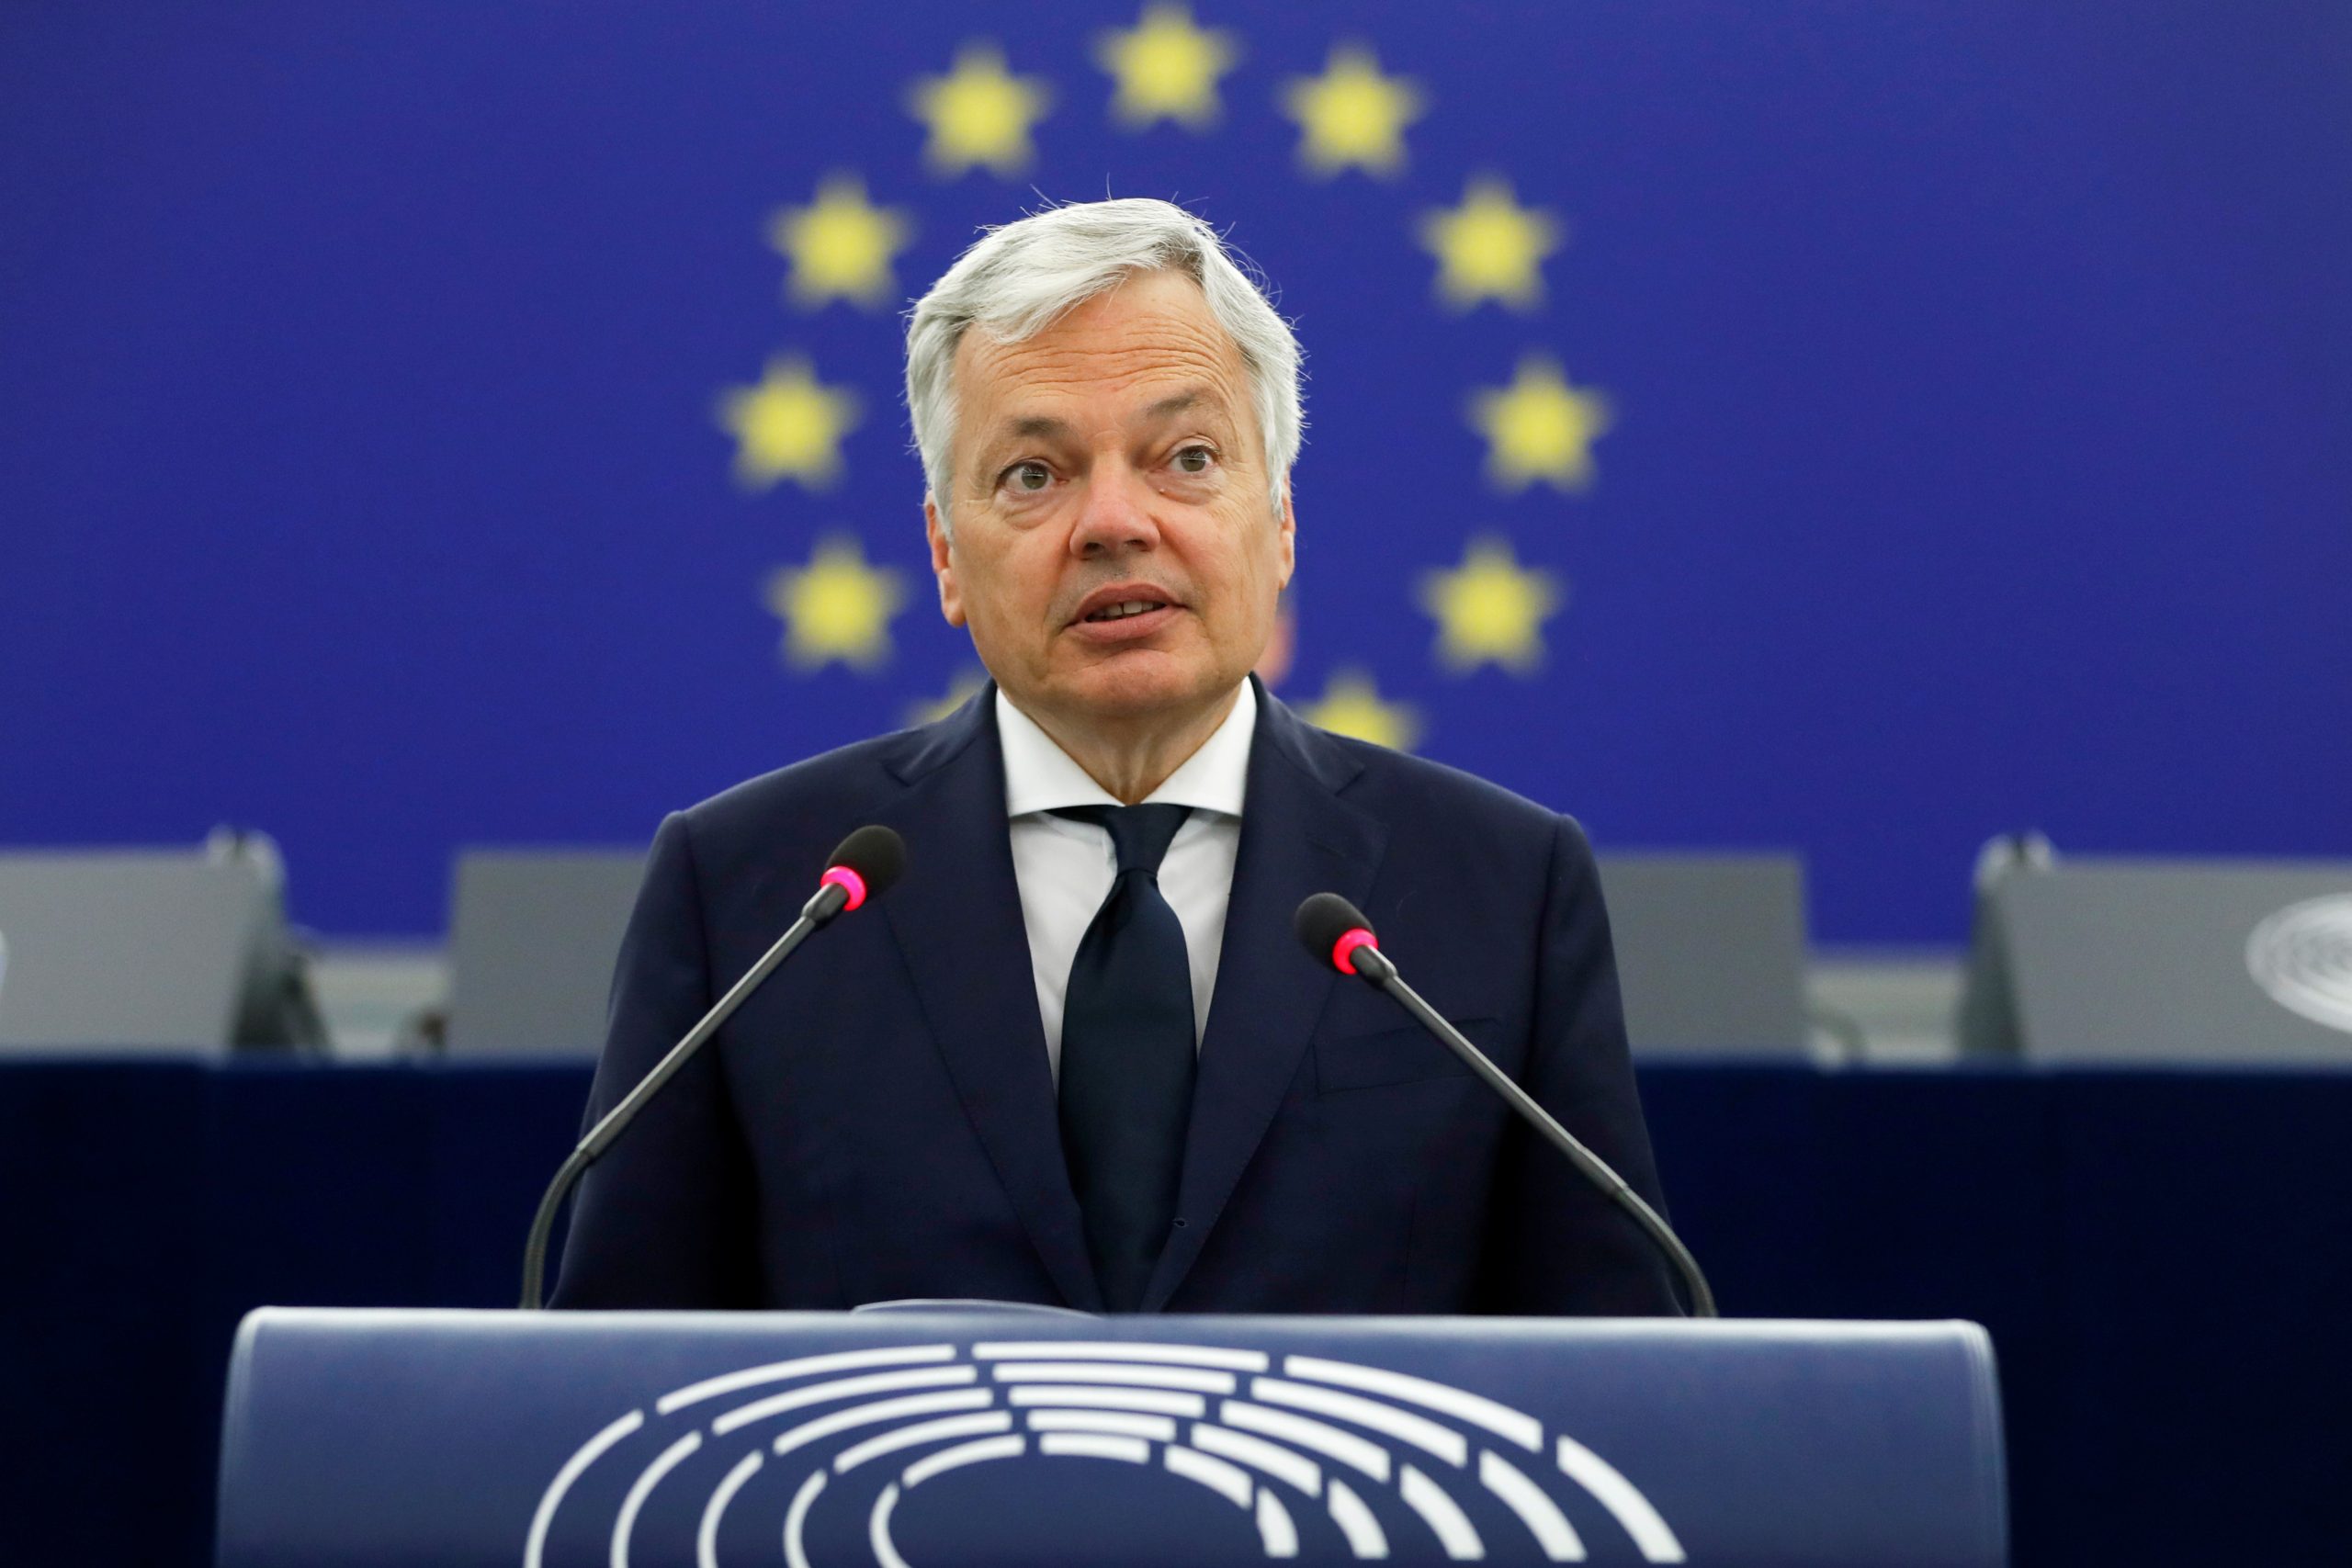 Plenary session at the European Parliament in Strasbourg European Commissioner for Justice Didier Reynders delivers his speech at the European Parliament in Strasbourg, France June 8, 2021. Jean-Francois Badias/Pool via REUTERS POOL